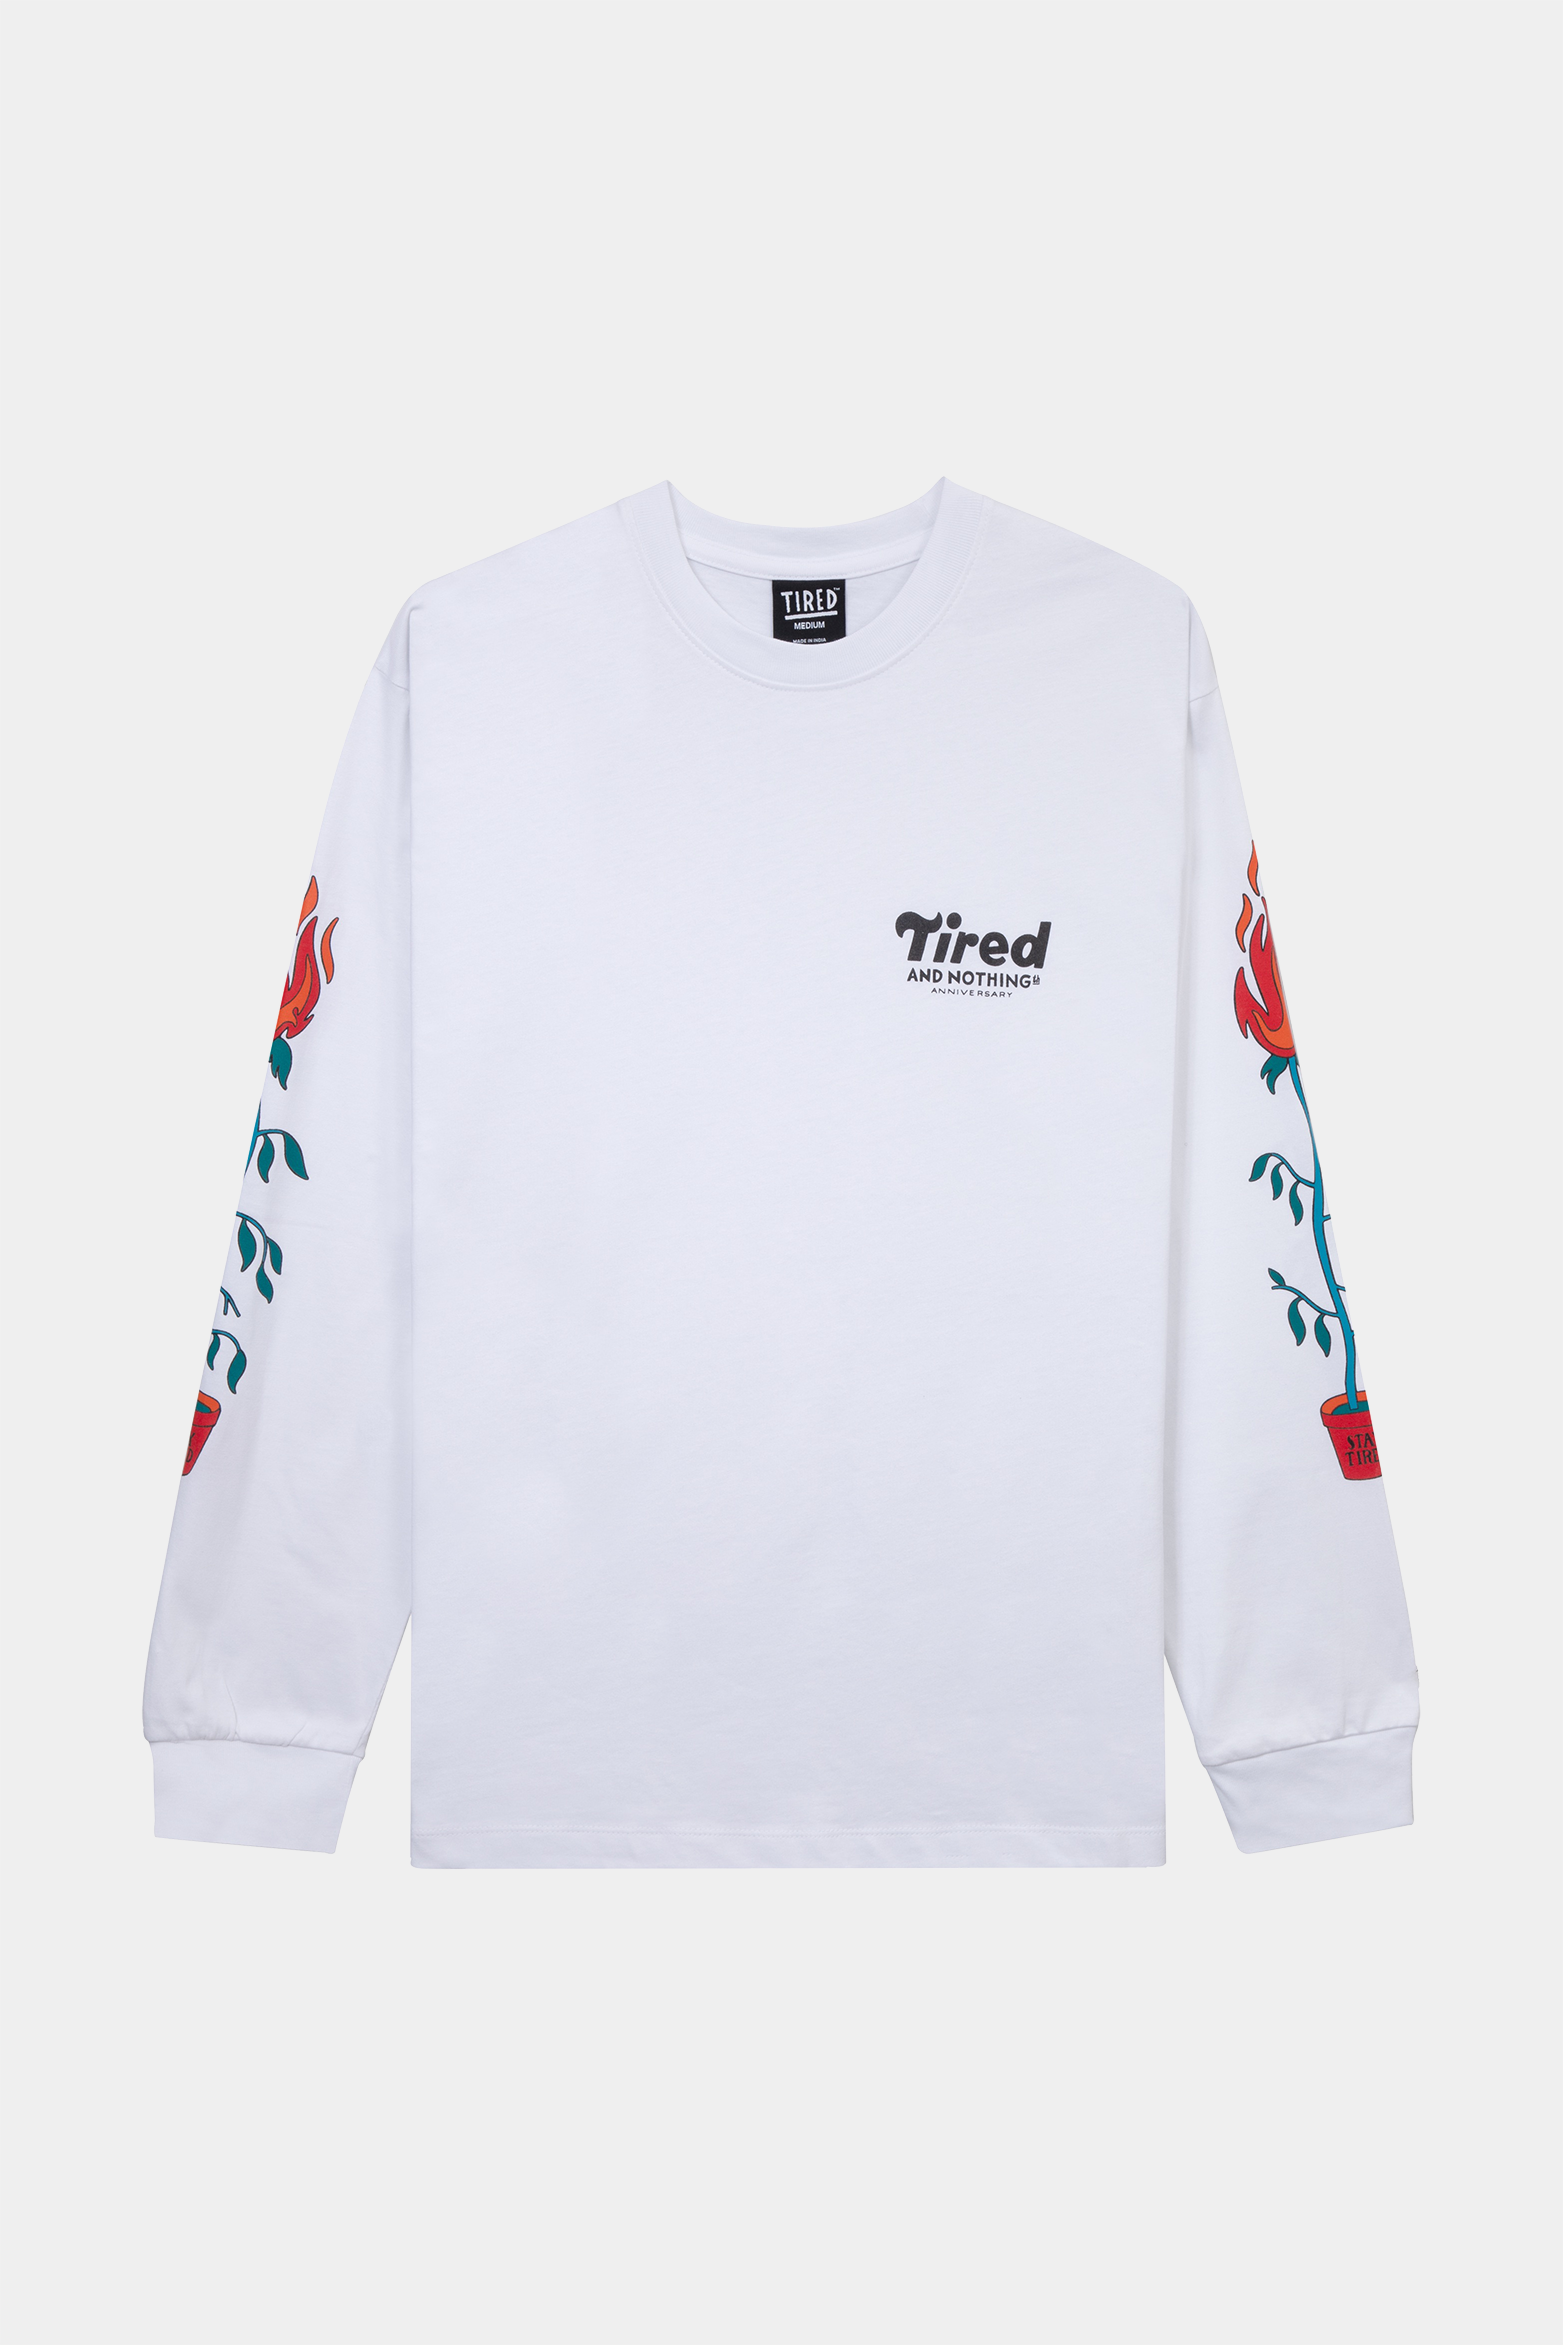 Selectshop FRAME - TIRED Nothingth LS Tee T-Shirts Concept Store Dubai